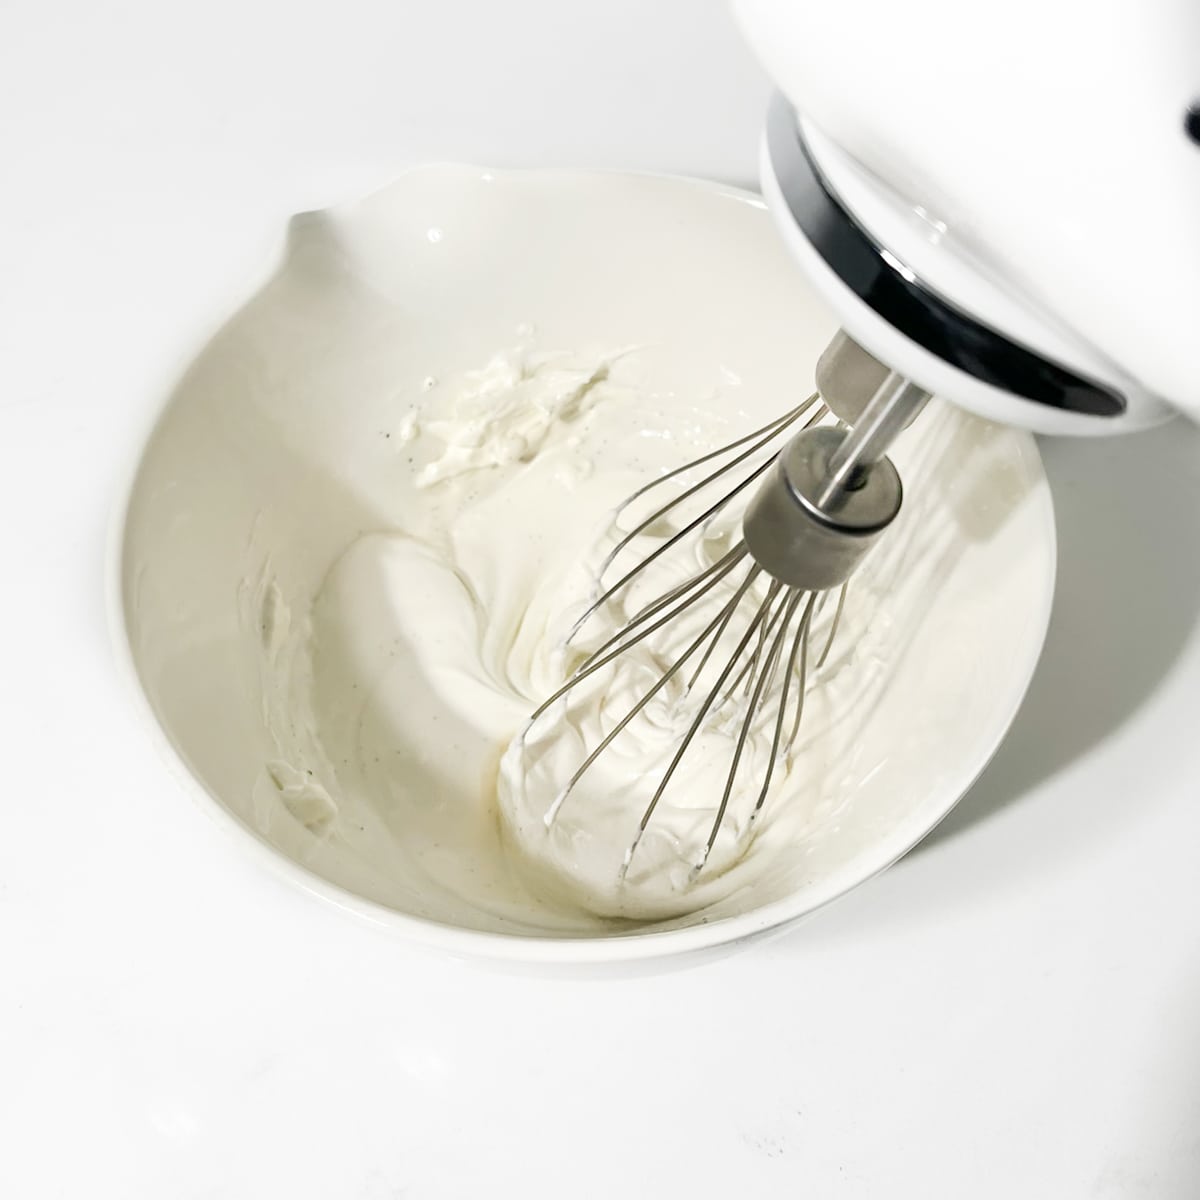 Whipping the mascarpone in a small bowl until smooth.